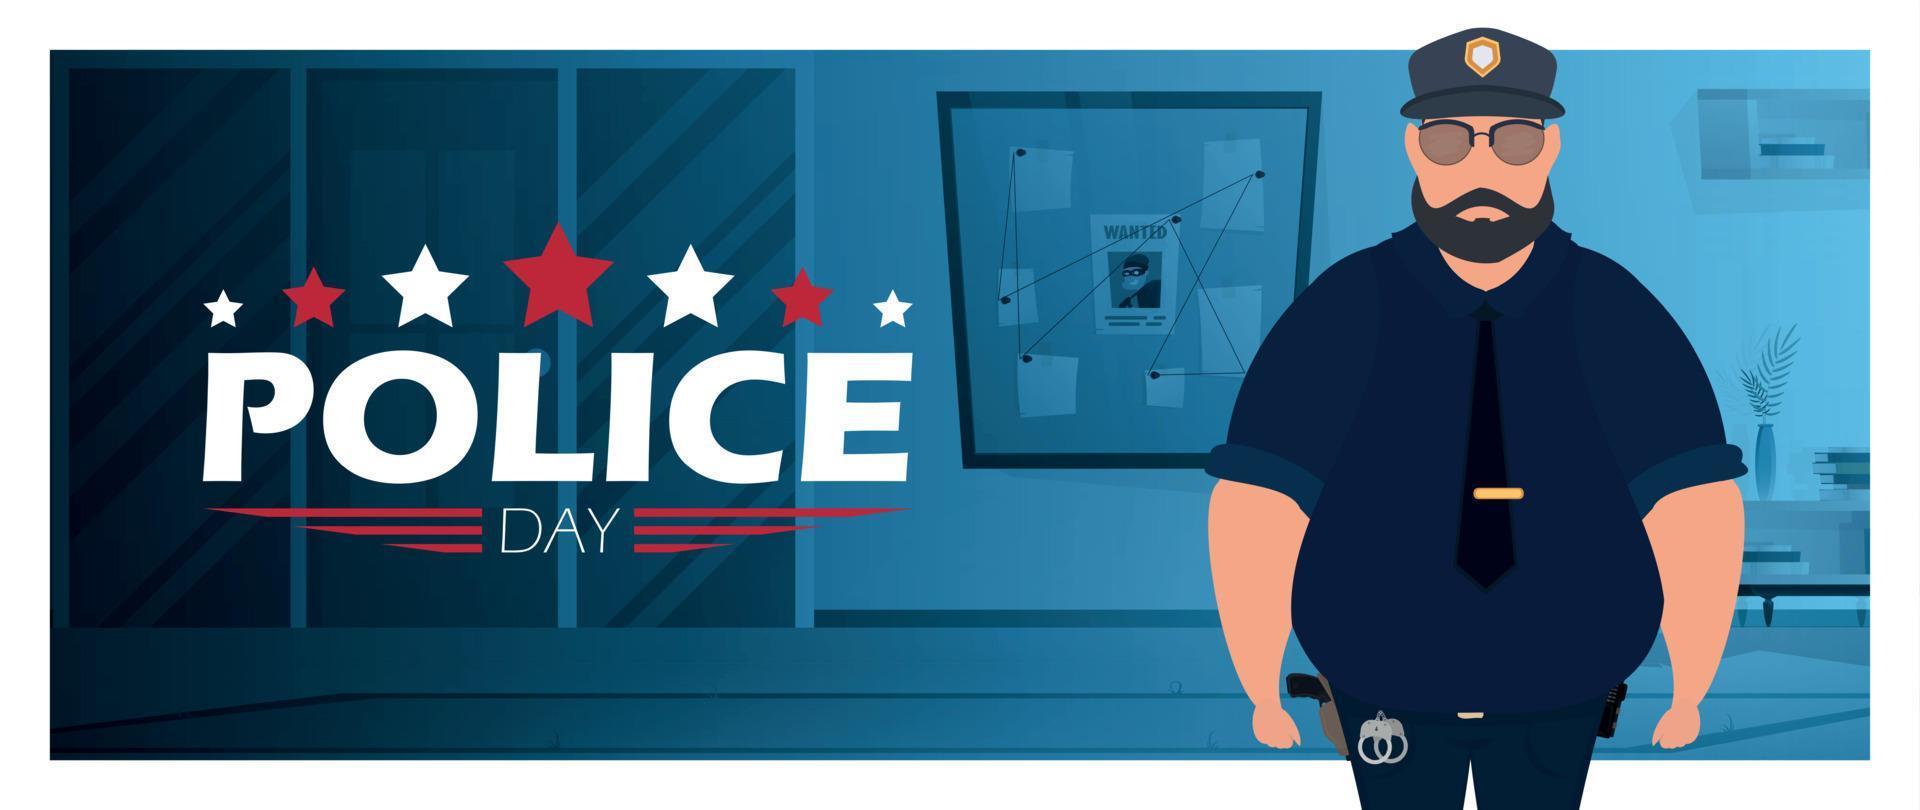 Police day poster in flat 2d style. Defender's Day. Vector illustration.